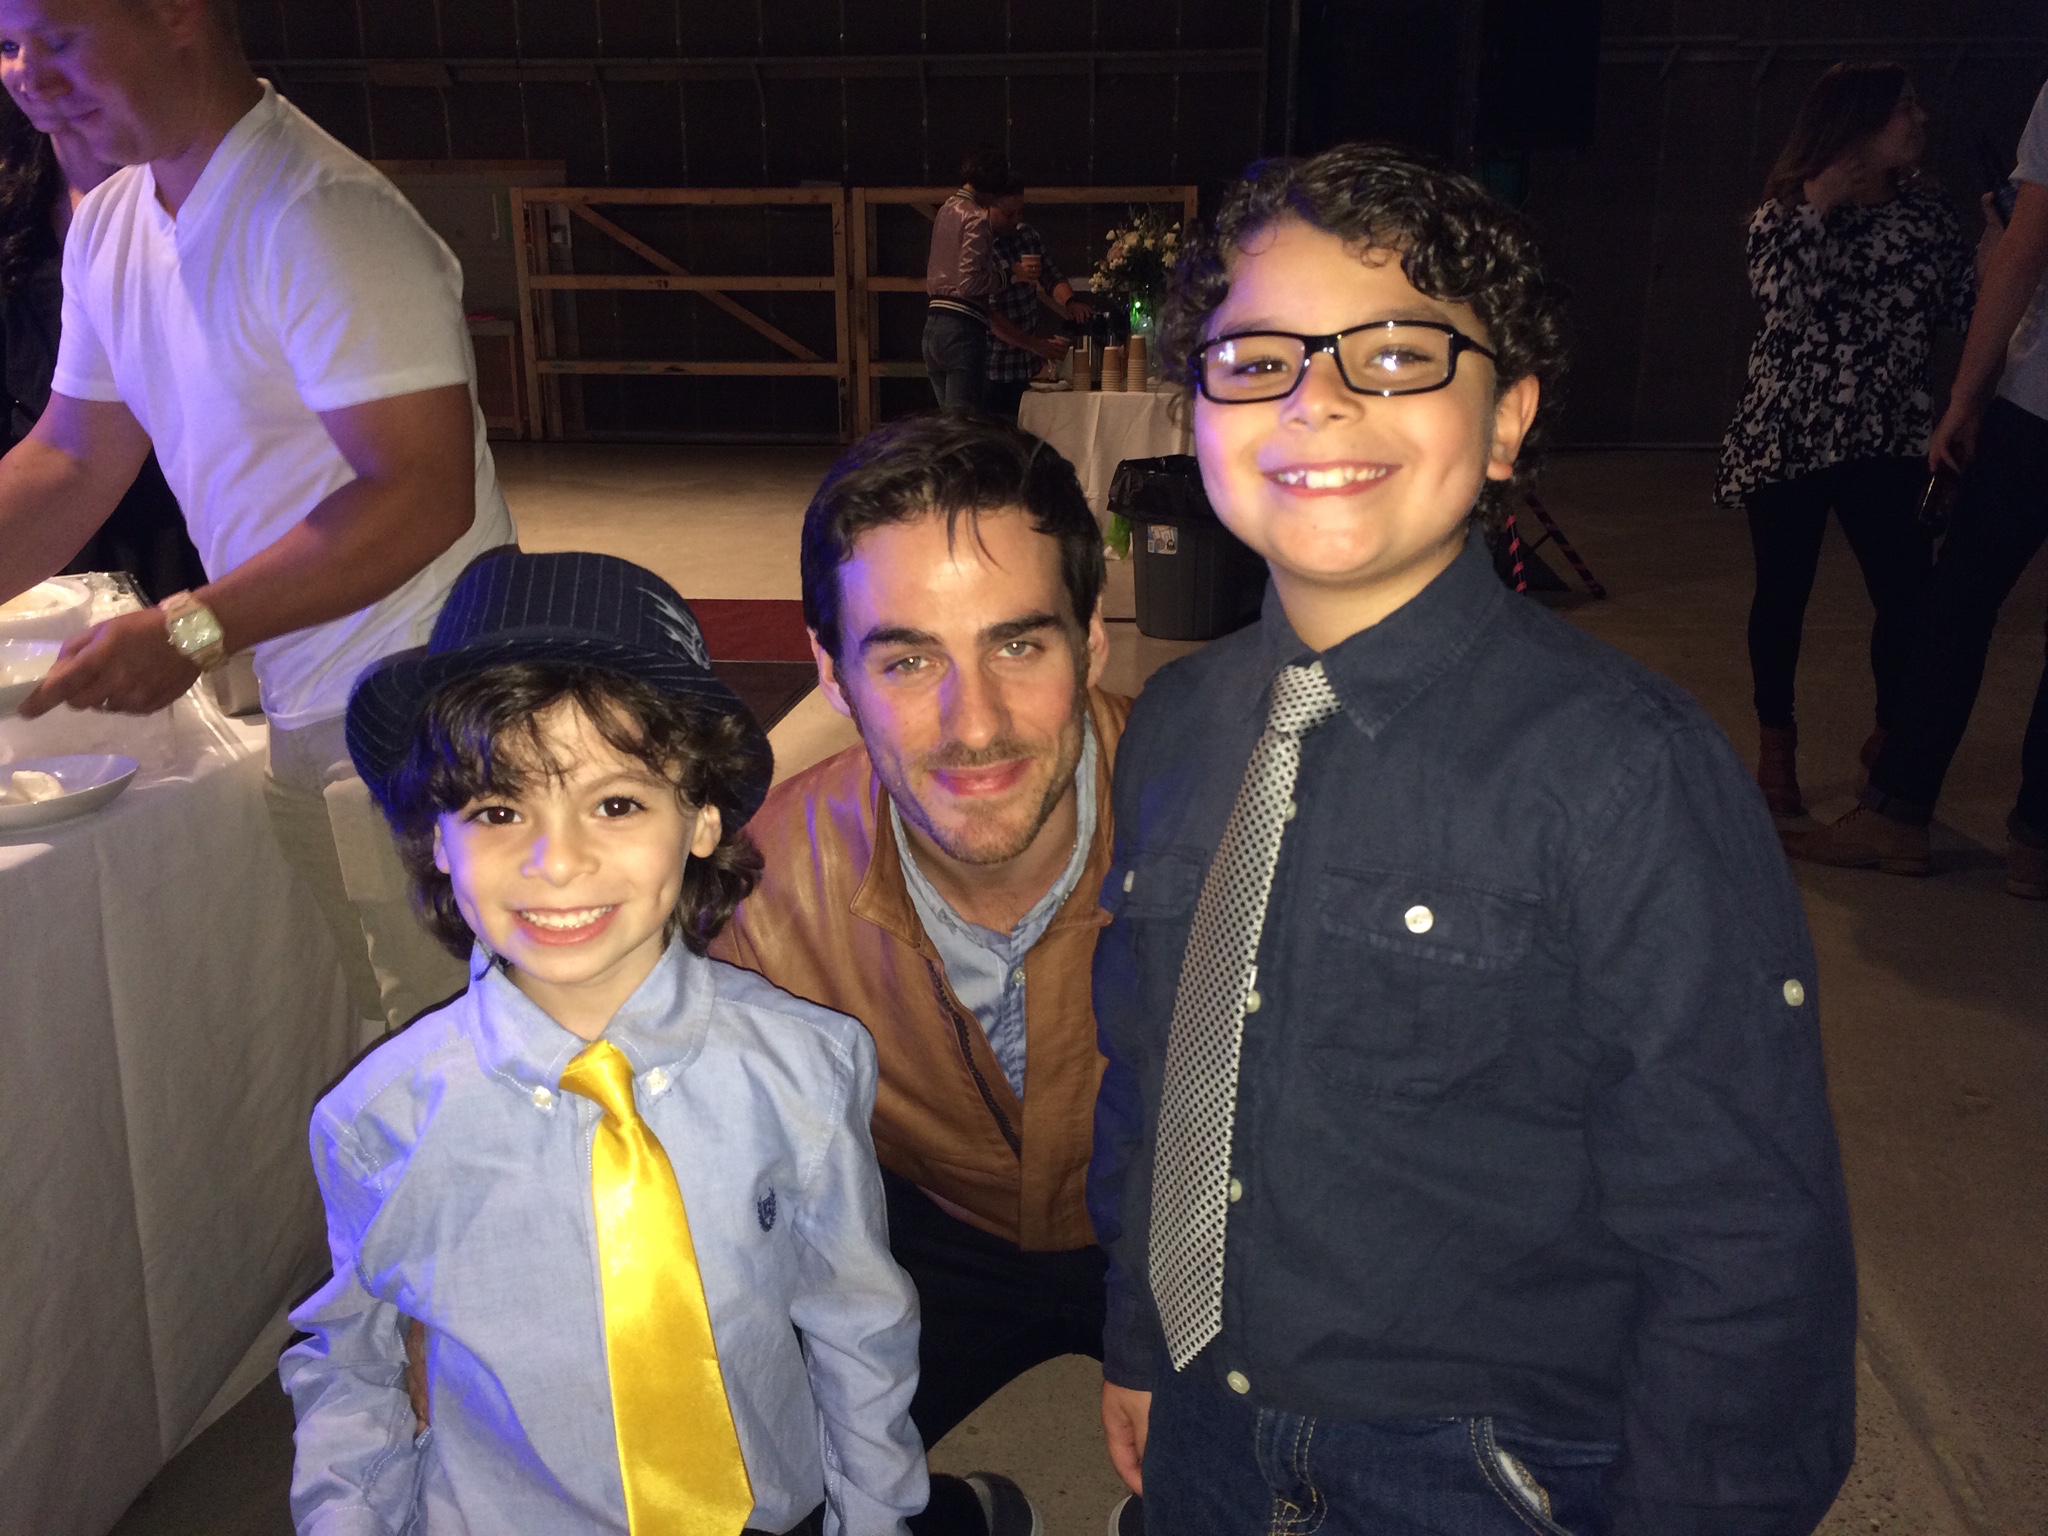 Bruce with Colin O'Donoghue & Brother Raphael Alejandro at the OUAT Season 3 Party